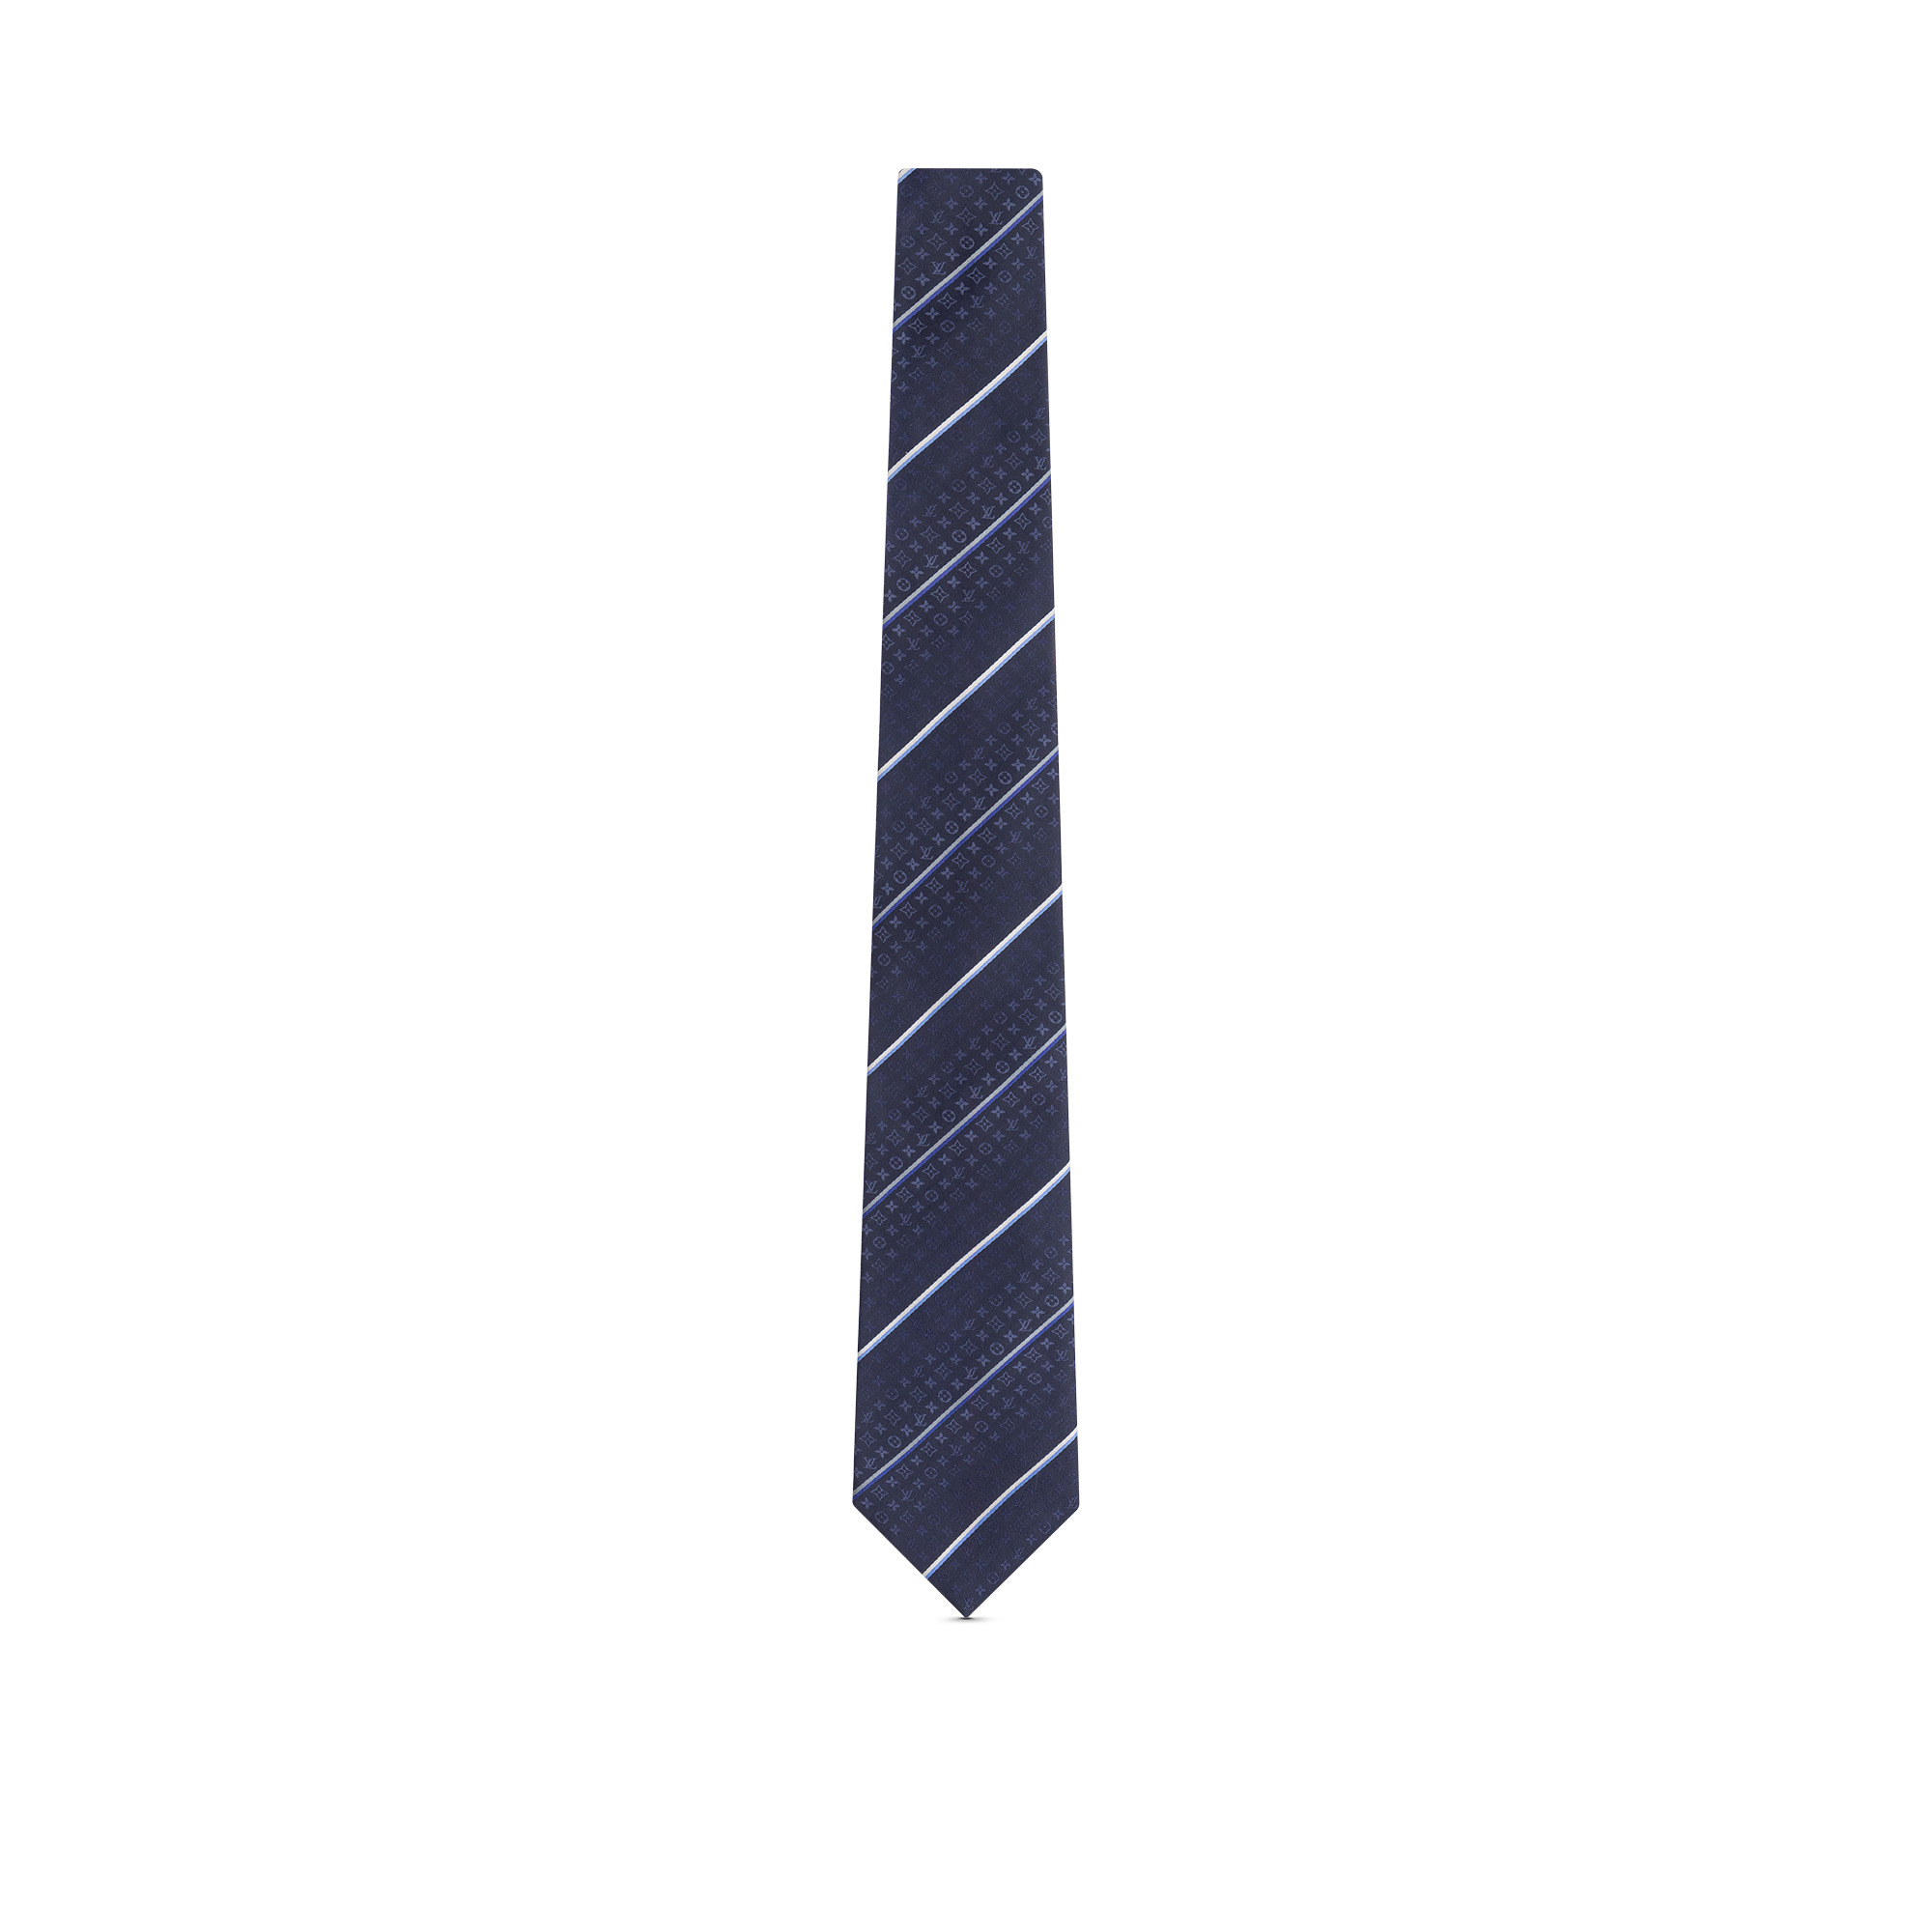 Over The Stripes Tie - 1